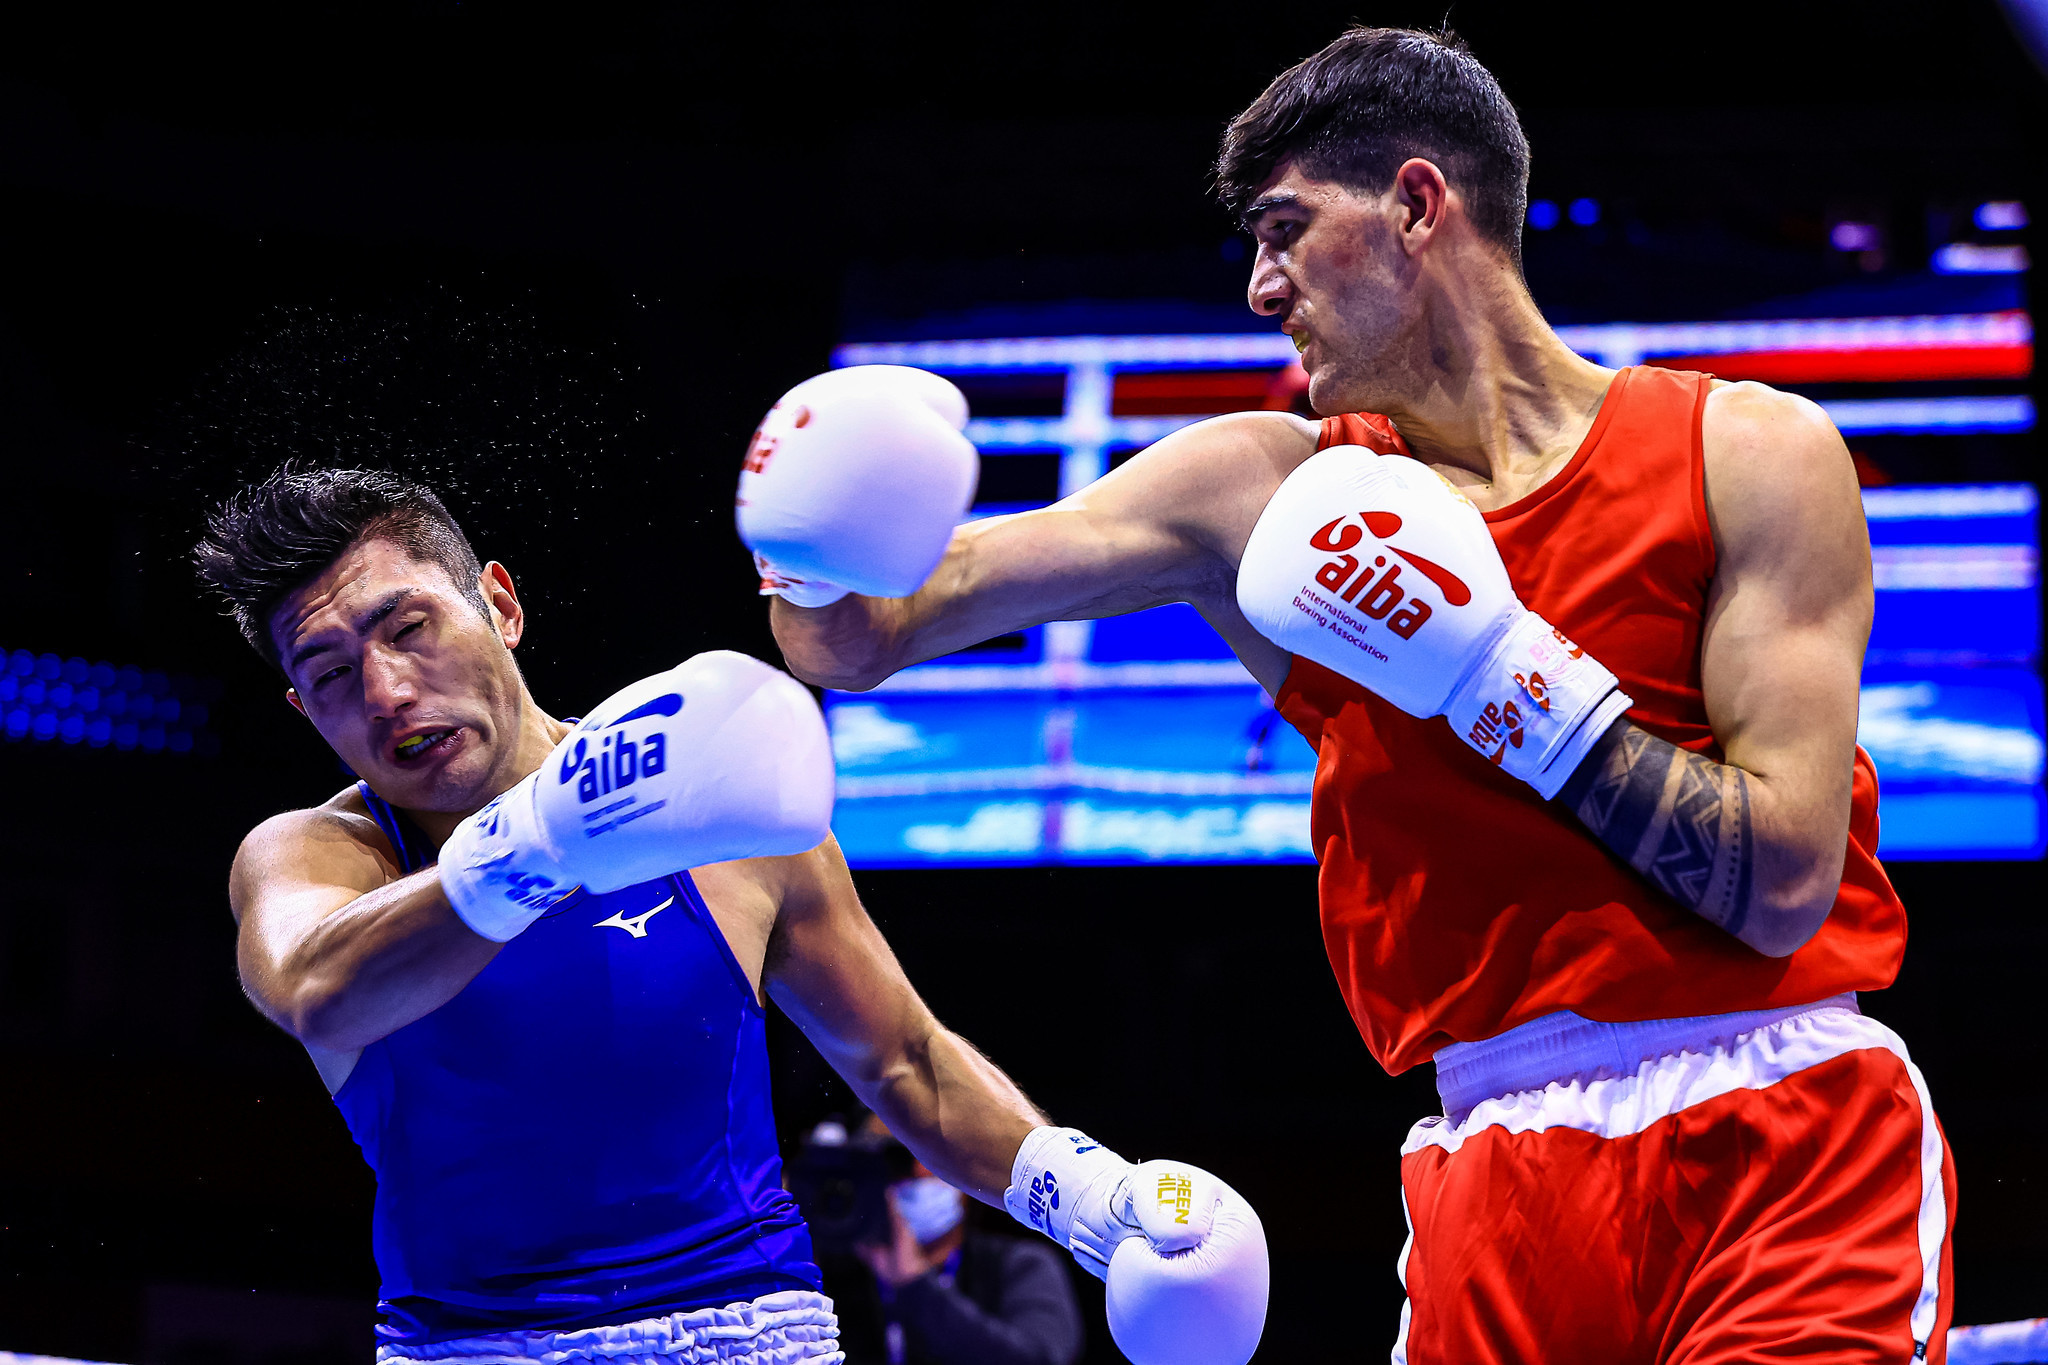 Fair Chance Team shine on day six with wins at AIBA Men's World Boxing Championships